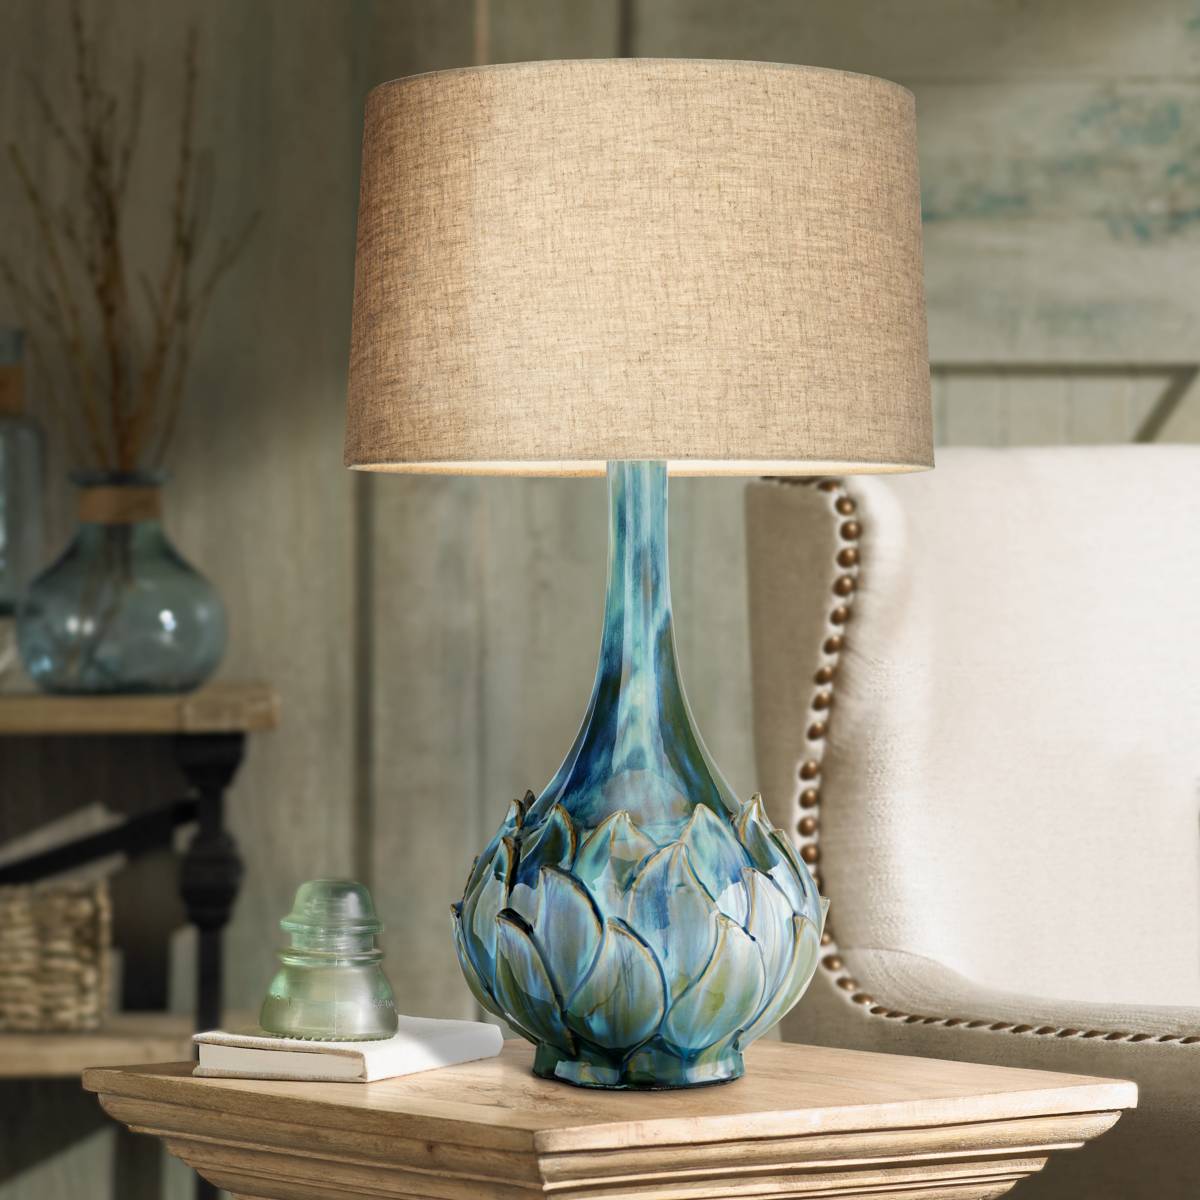 Blue Table Lamps Plus, Blue Table Lamps For Bedroom